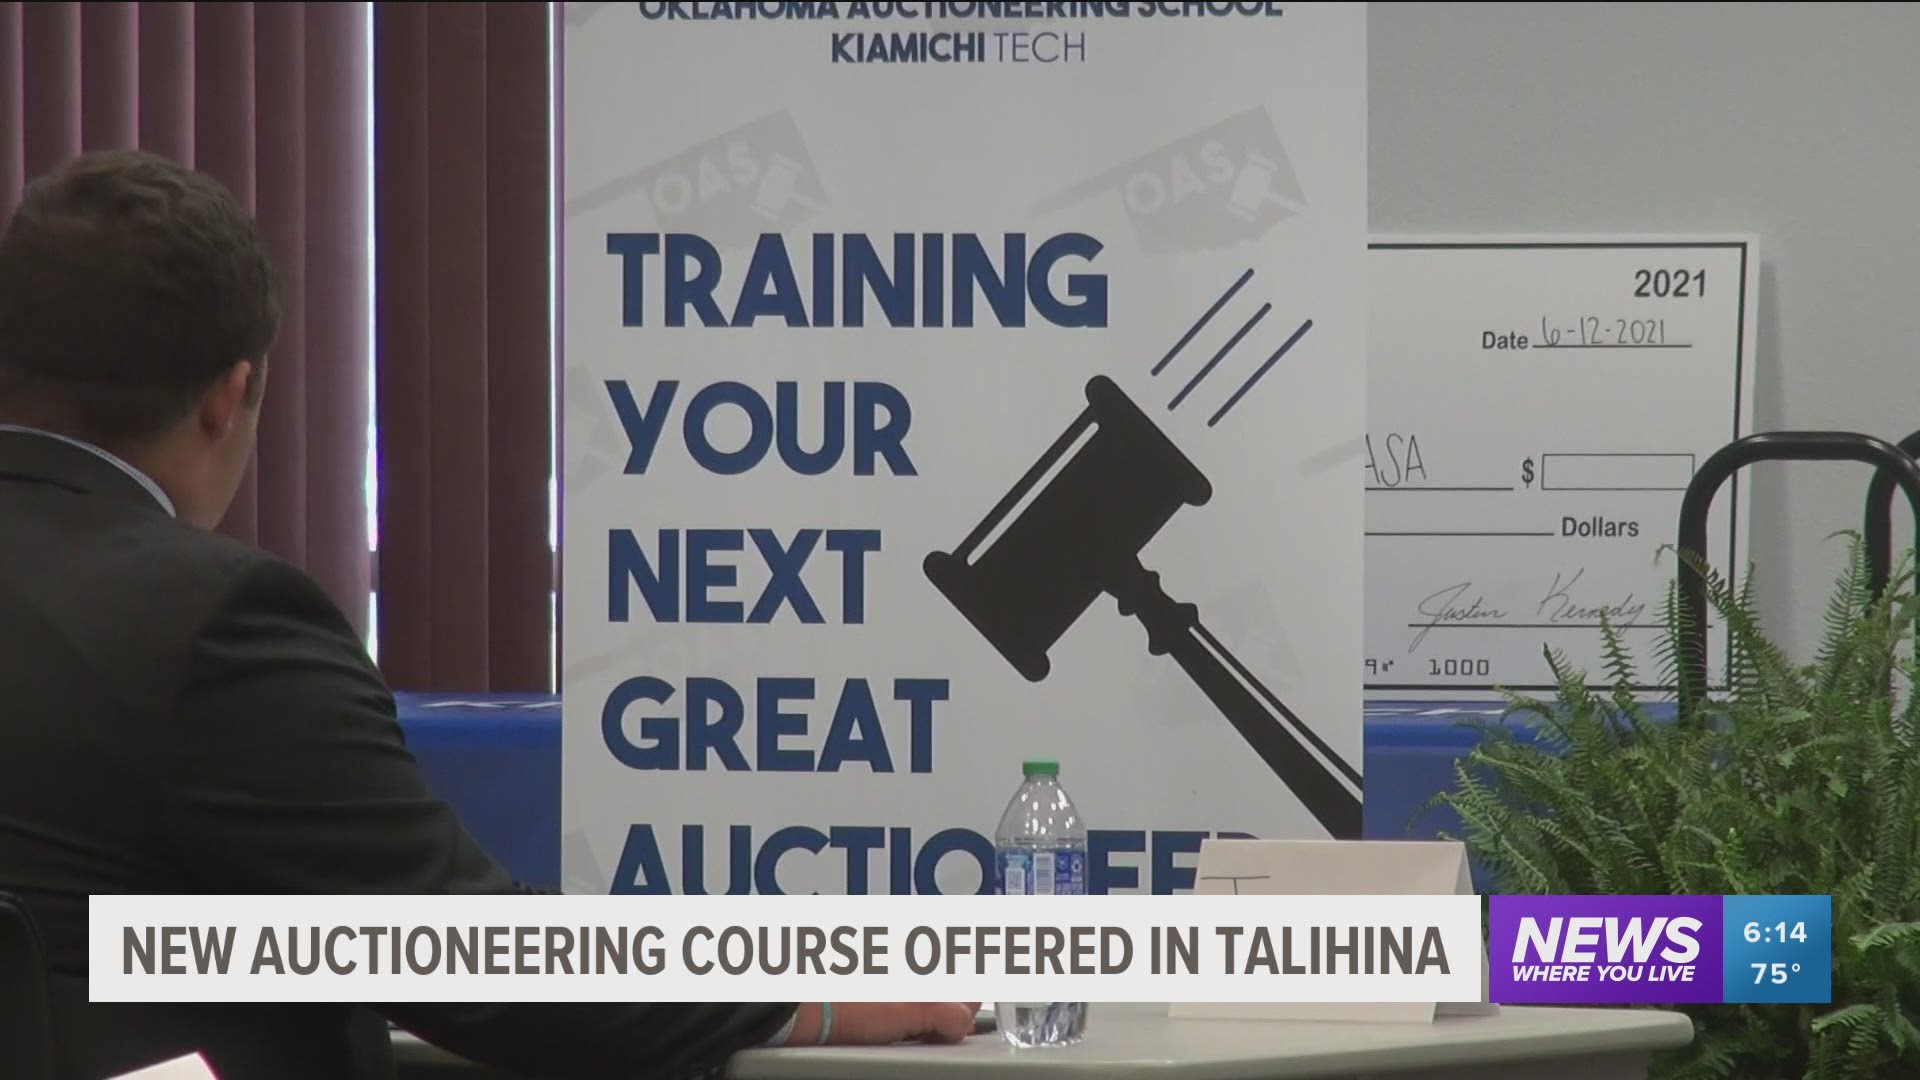 Kiamichi Tech in Talihina is now the only college in Oklahoma and Arkansas offering courses to earn a certificate in auctioneering.